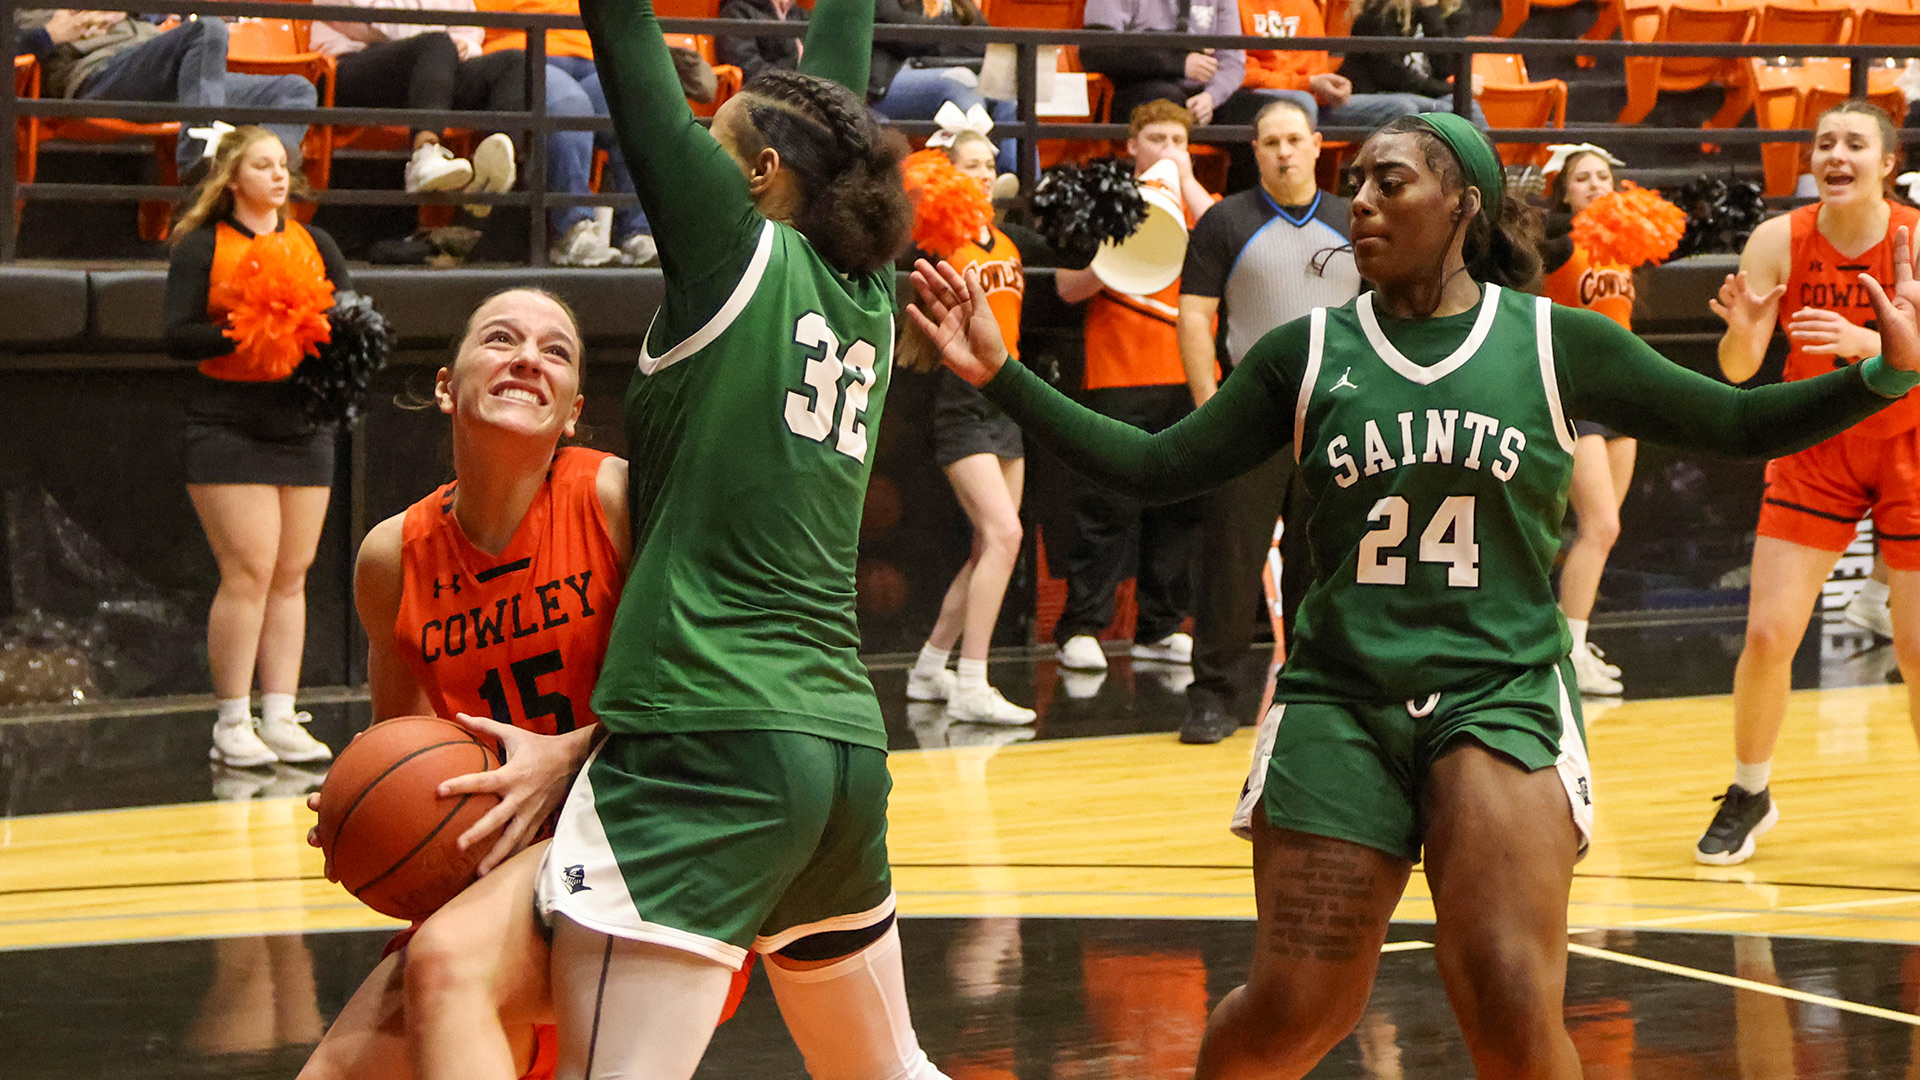 Lady Tigers come up just short in 71-68 loss to Seward